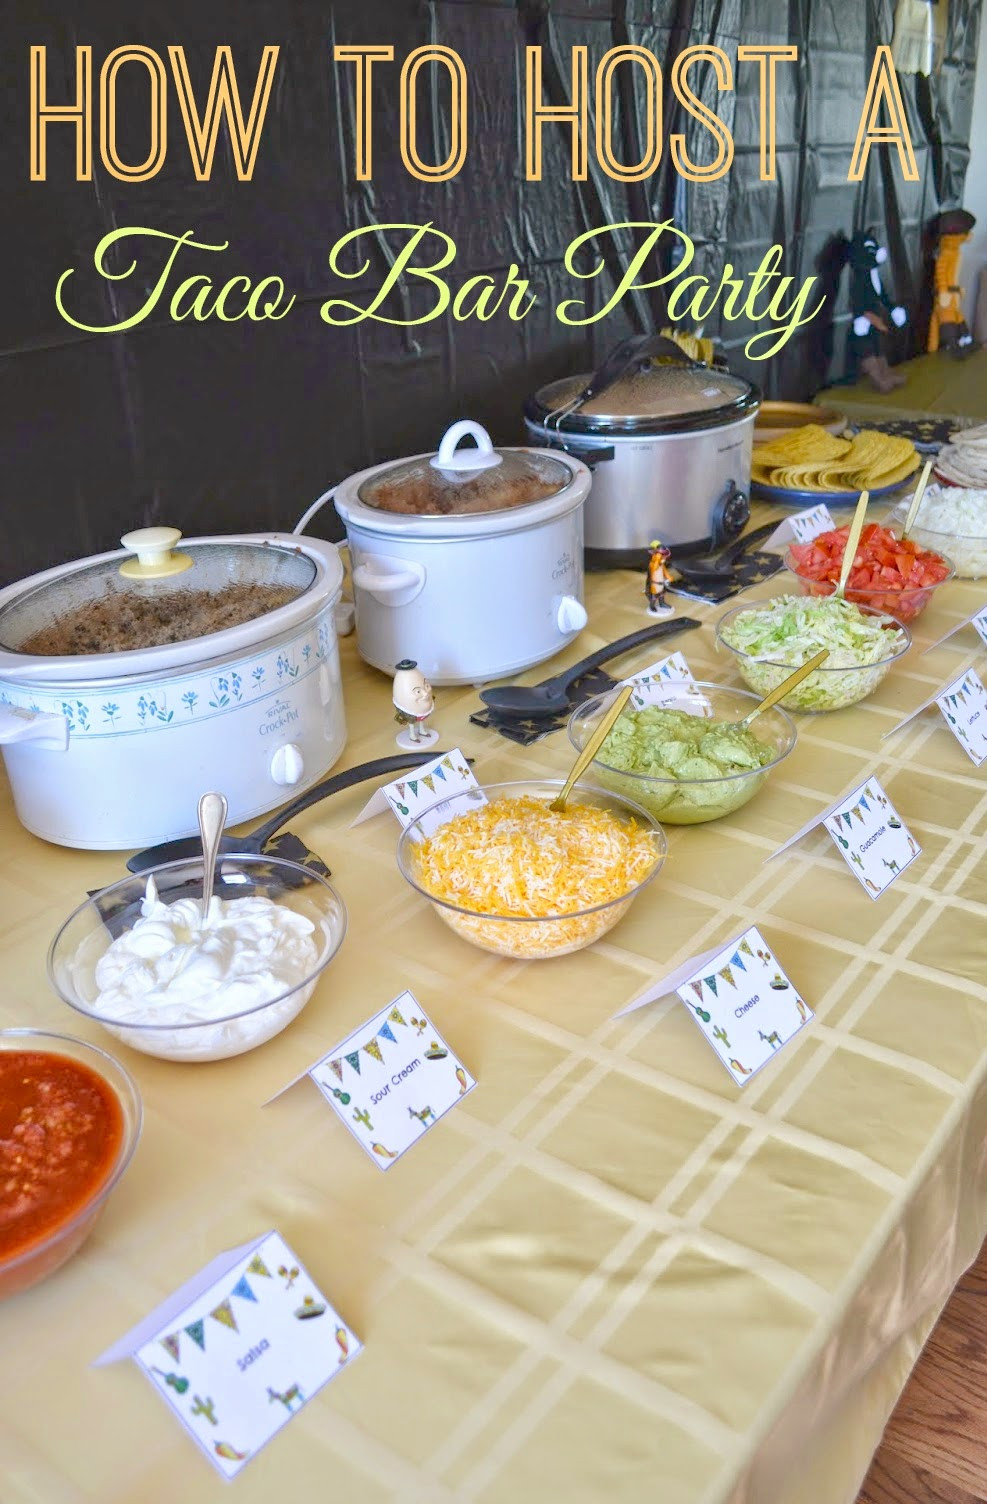 Taco Dinner Party Ideas
 DIY Taco Bar Party Table Tents Free Printables